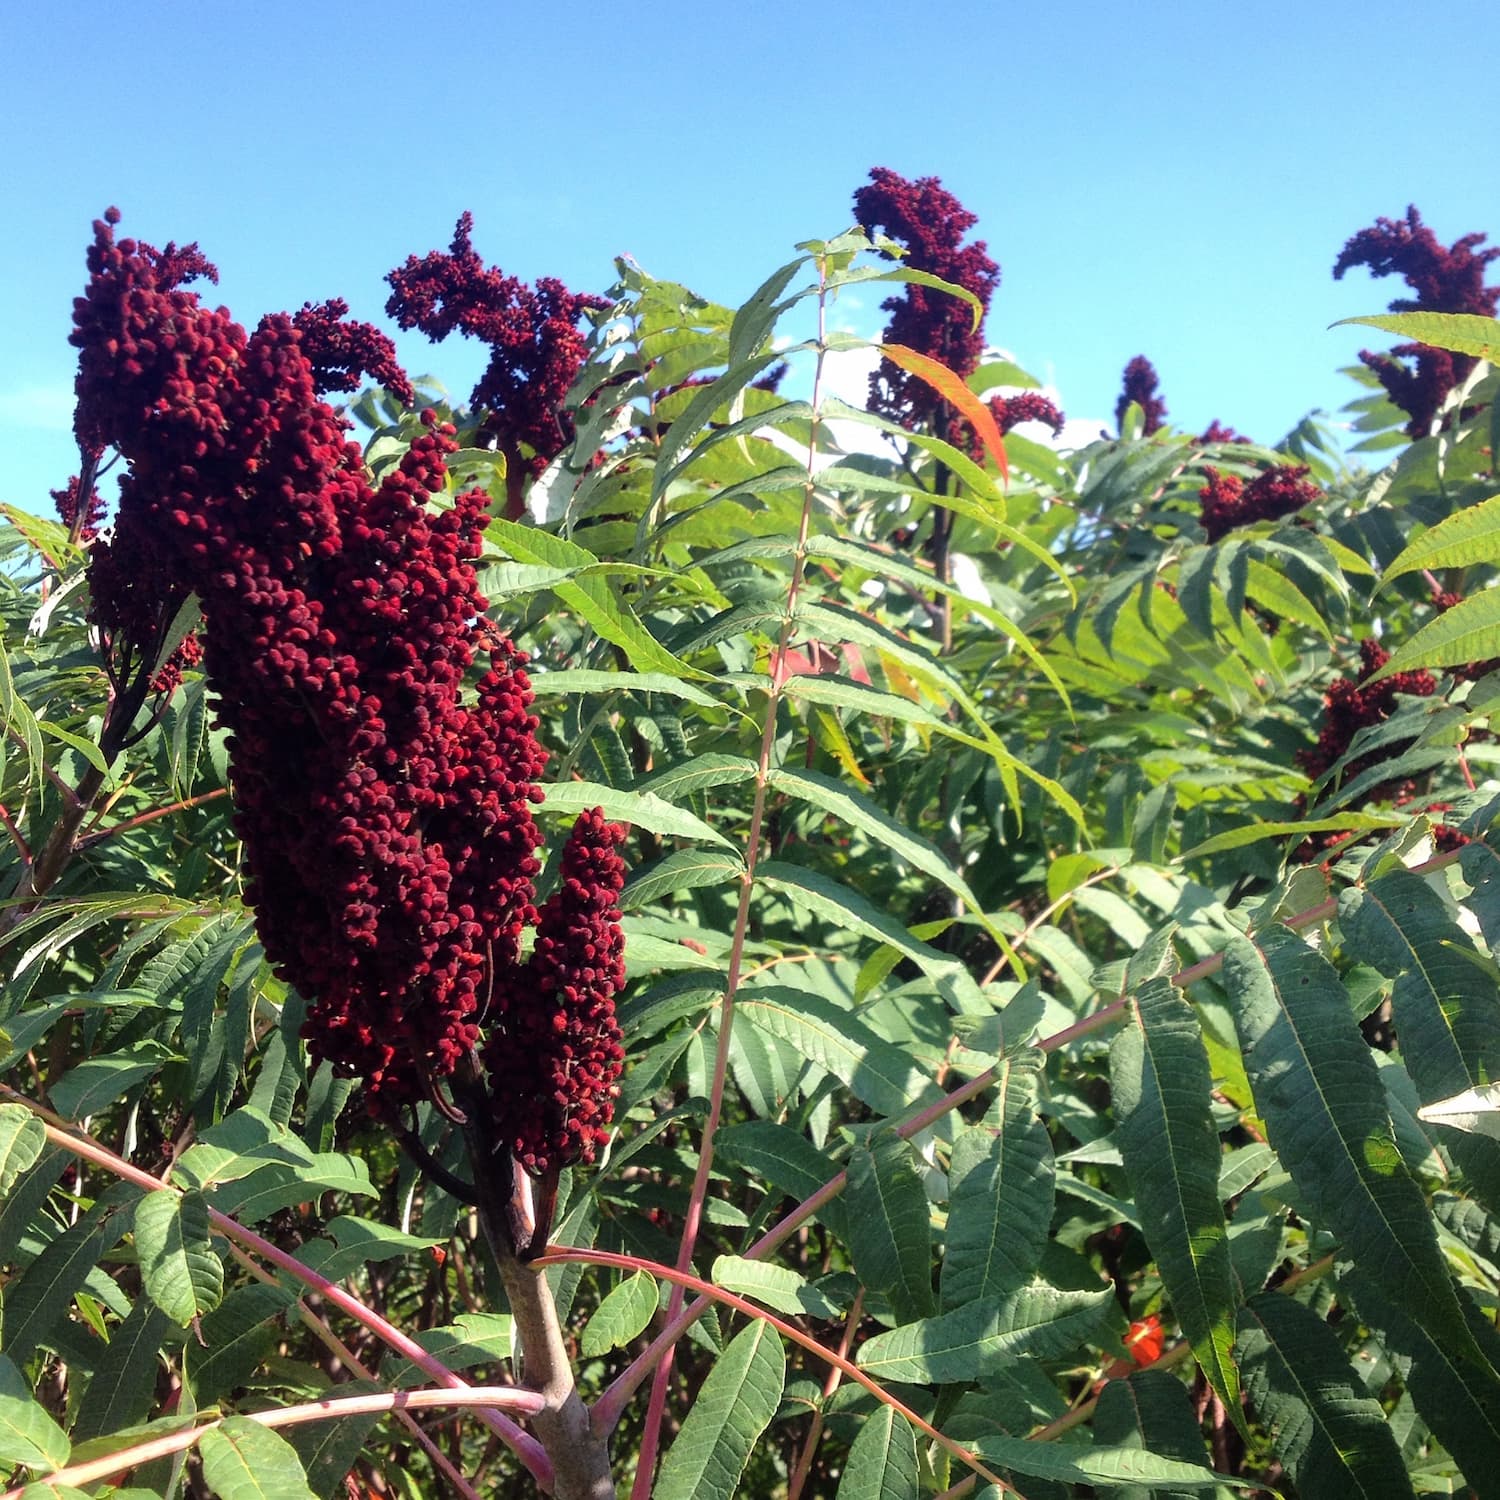 Sumac is a very common and beautiful sight along roadsides throughout the US.